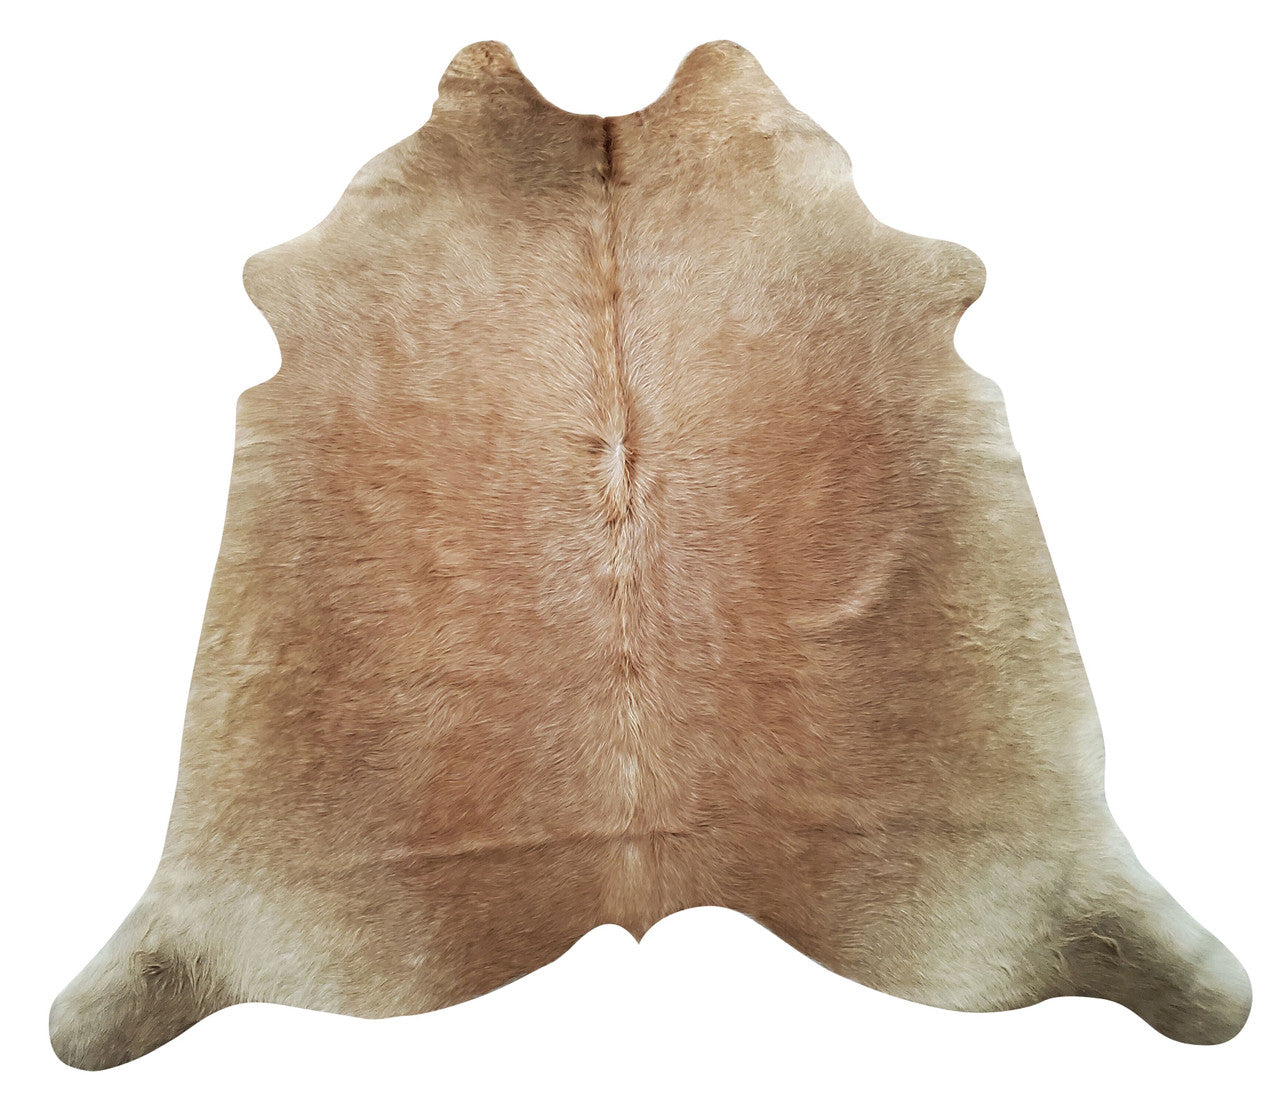 This cowhide rug exceeded any expectations. Absolutely beautiful, in impeccable condition both of material and cleanliness.